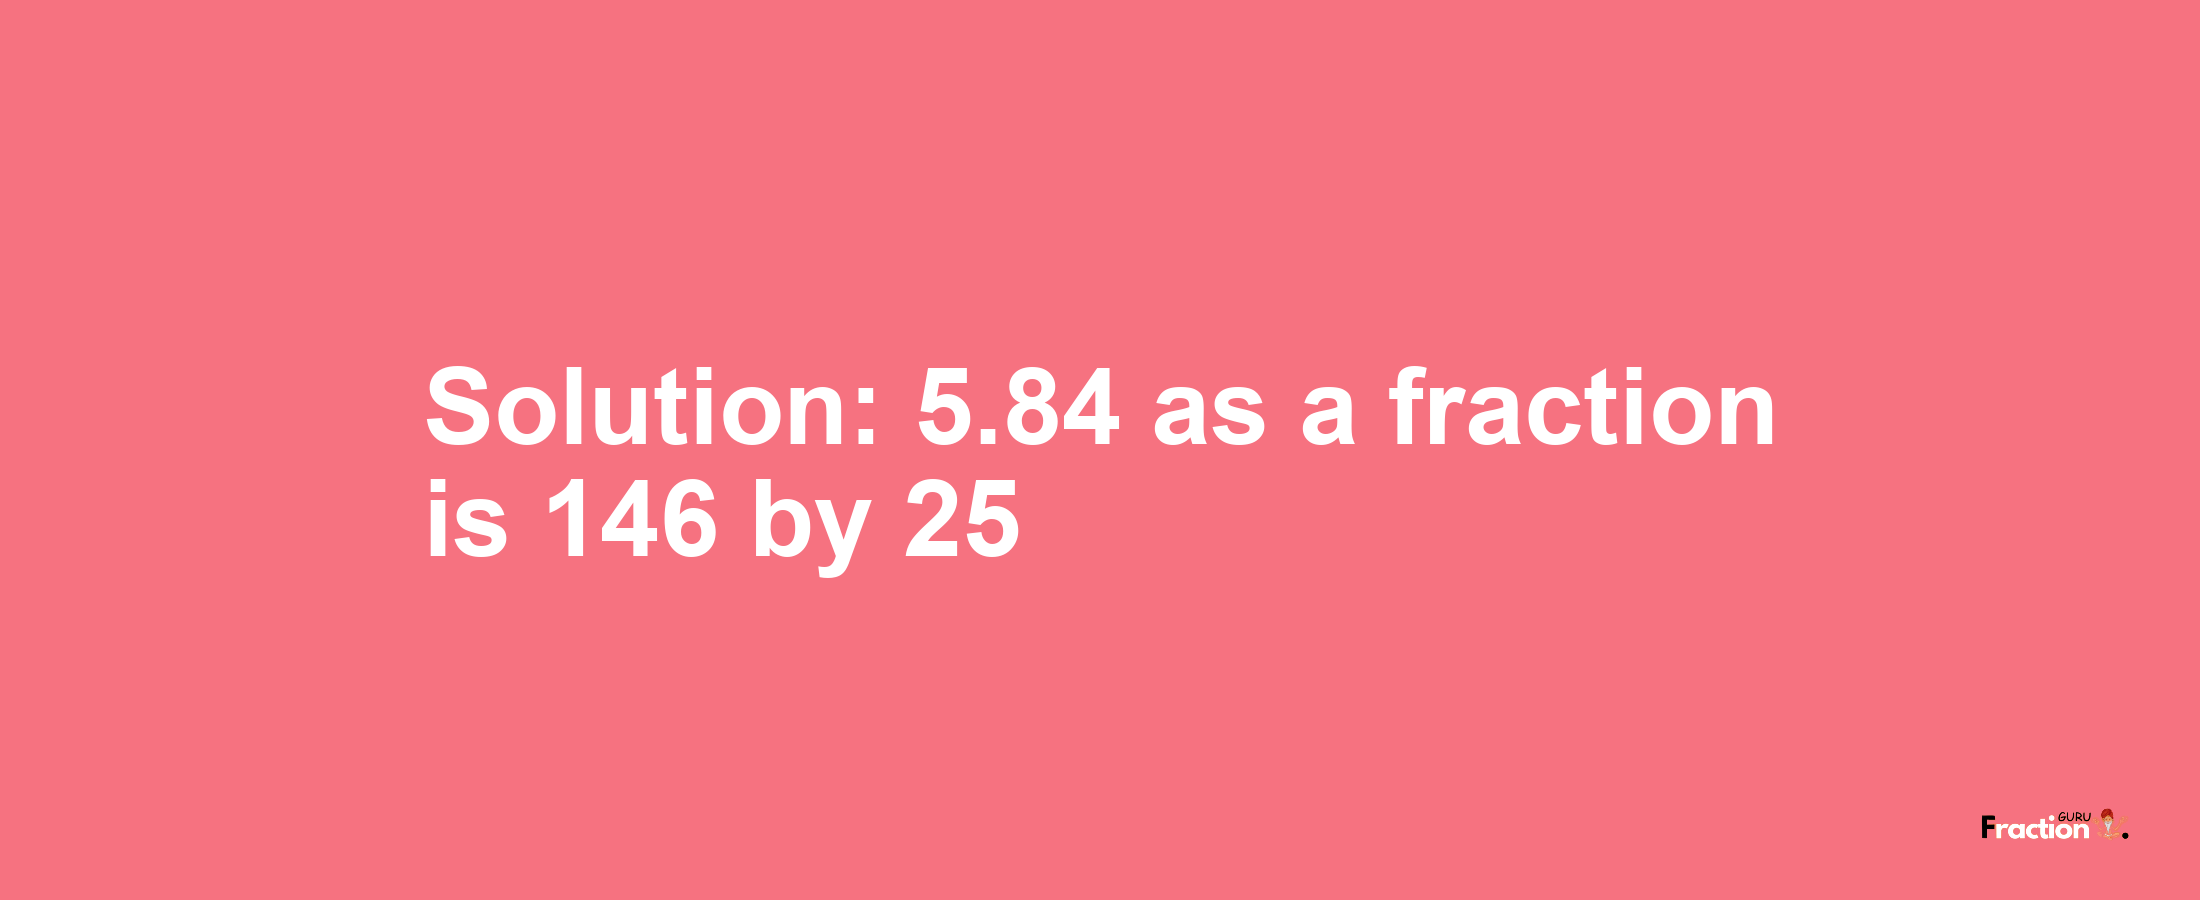 Solution:5.84 as a fraction is 146/25